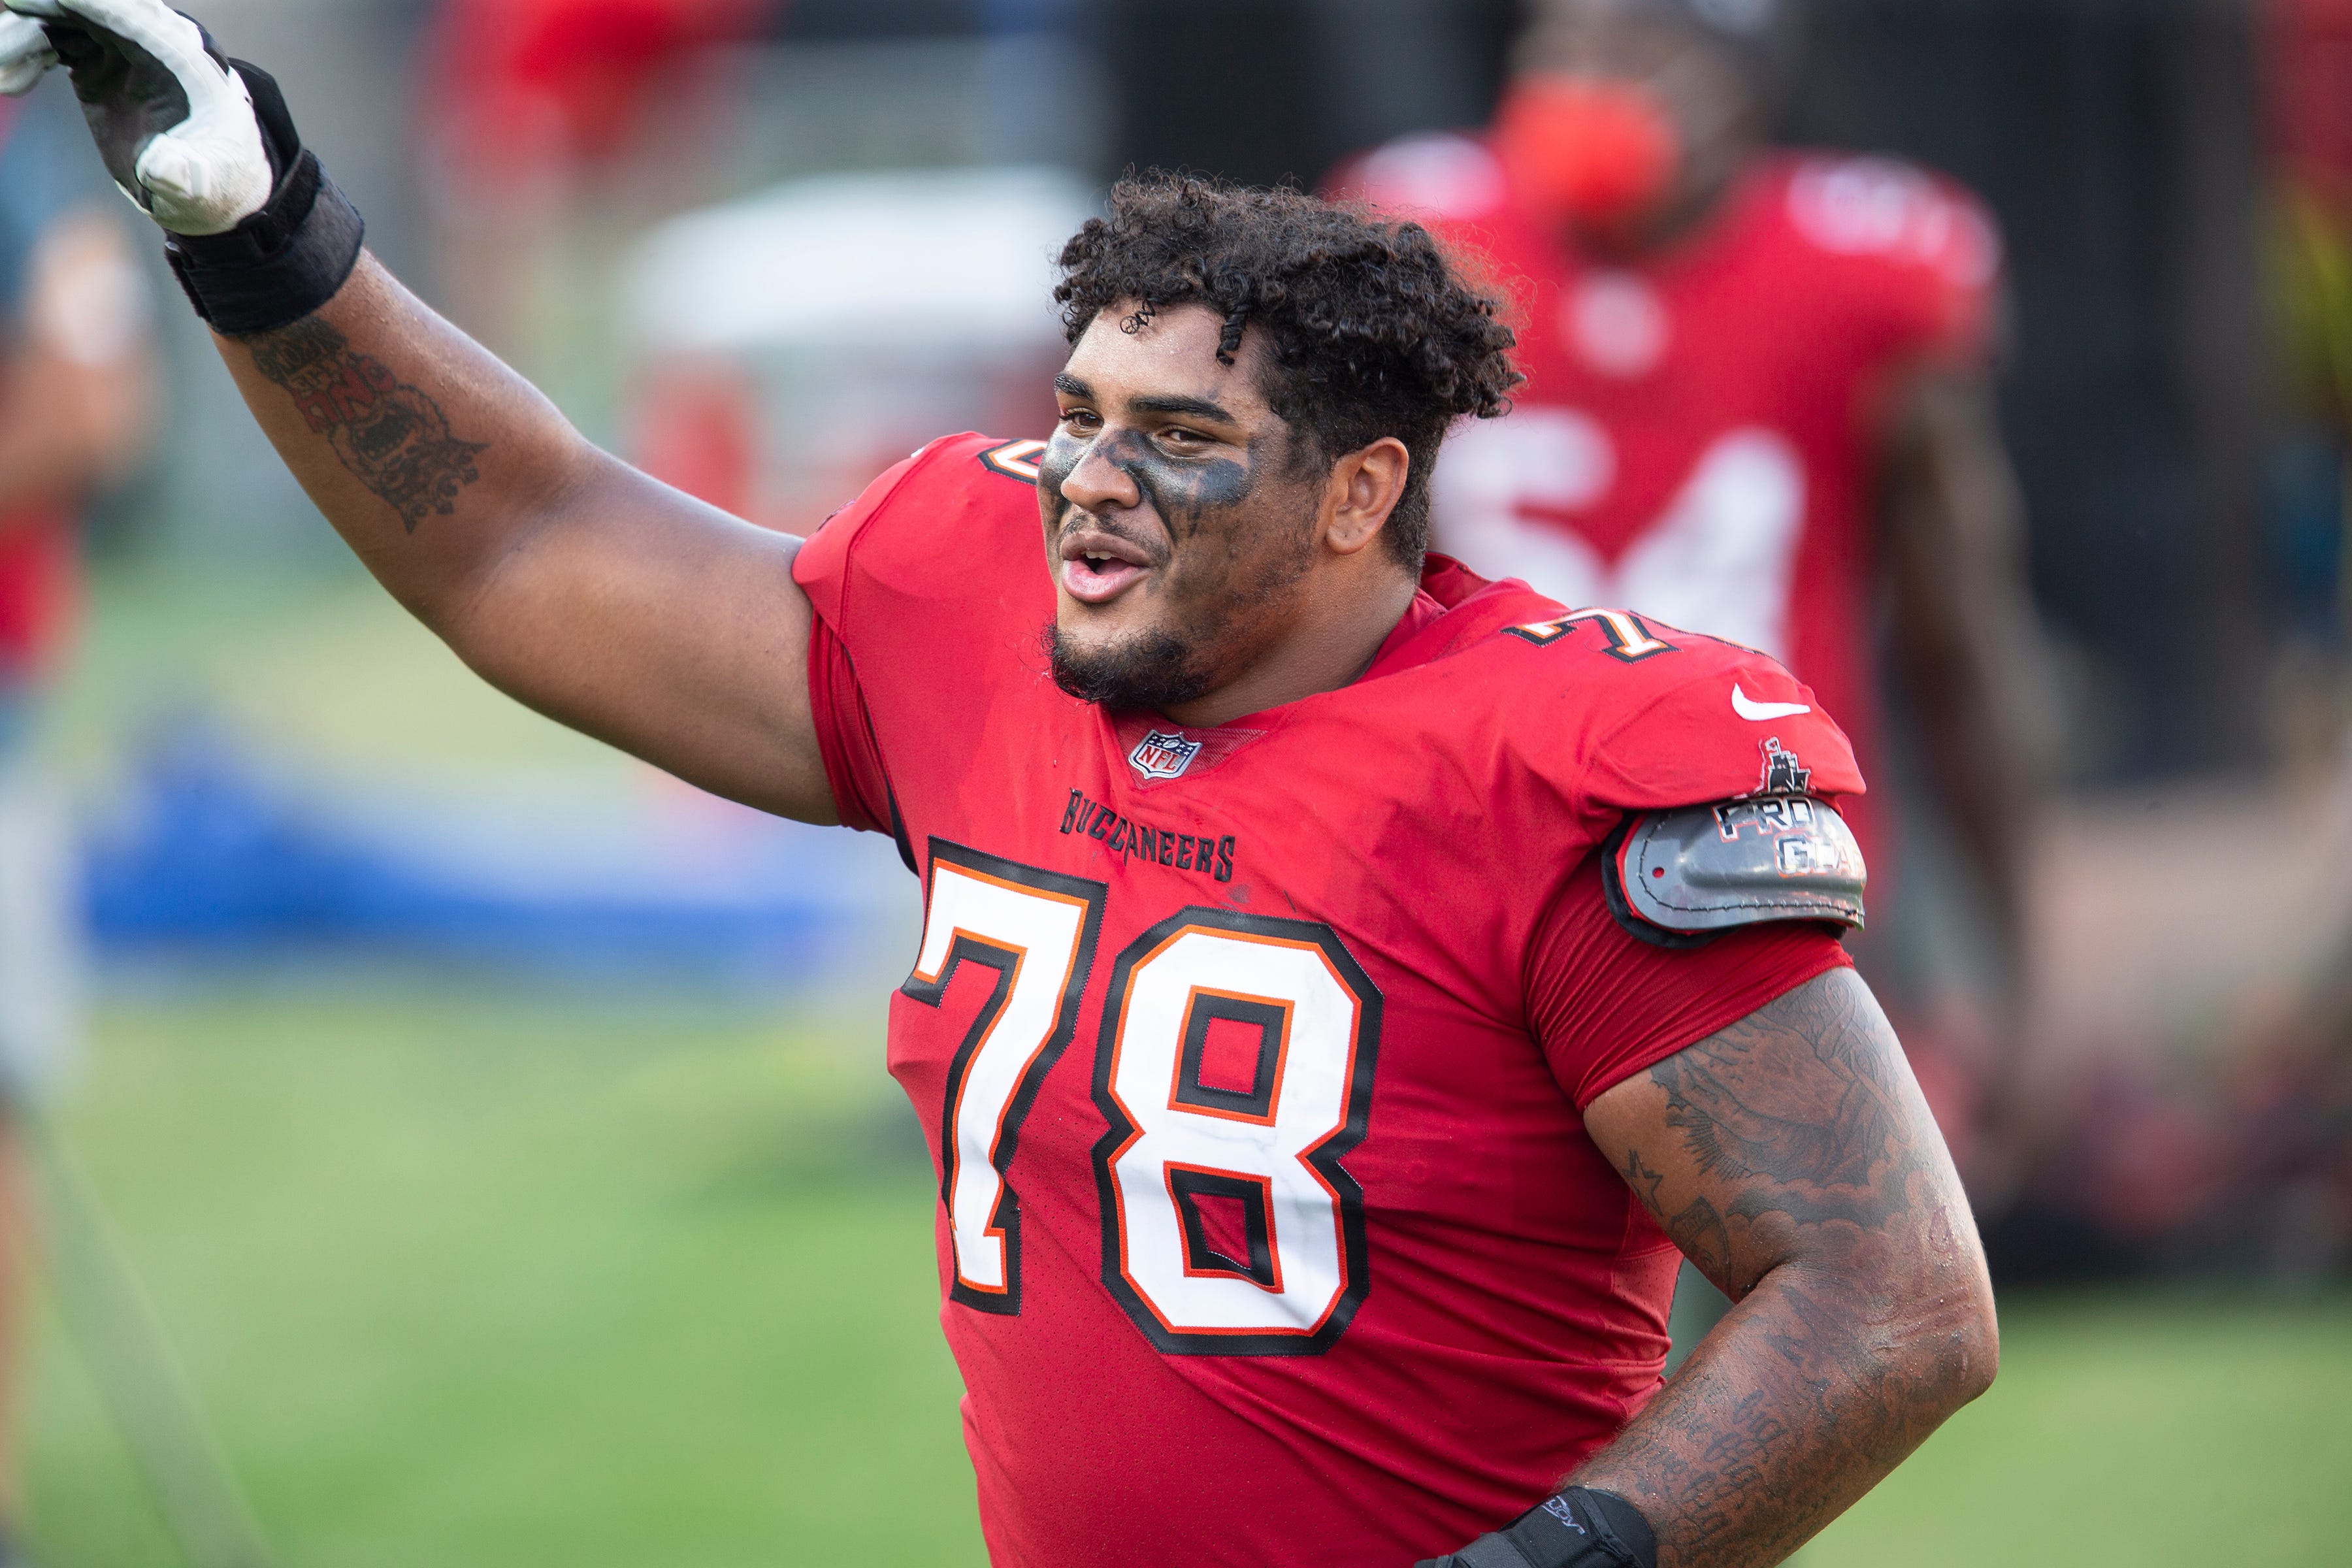 Tampa Bay Buccaneers offensive tackle Tristan Wirfs (78) against the Minnesota Vikings on Sunday, Dec. 13, 2020, in Tampa, Fla. (AP Photo/Alex Menendez)